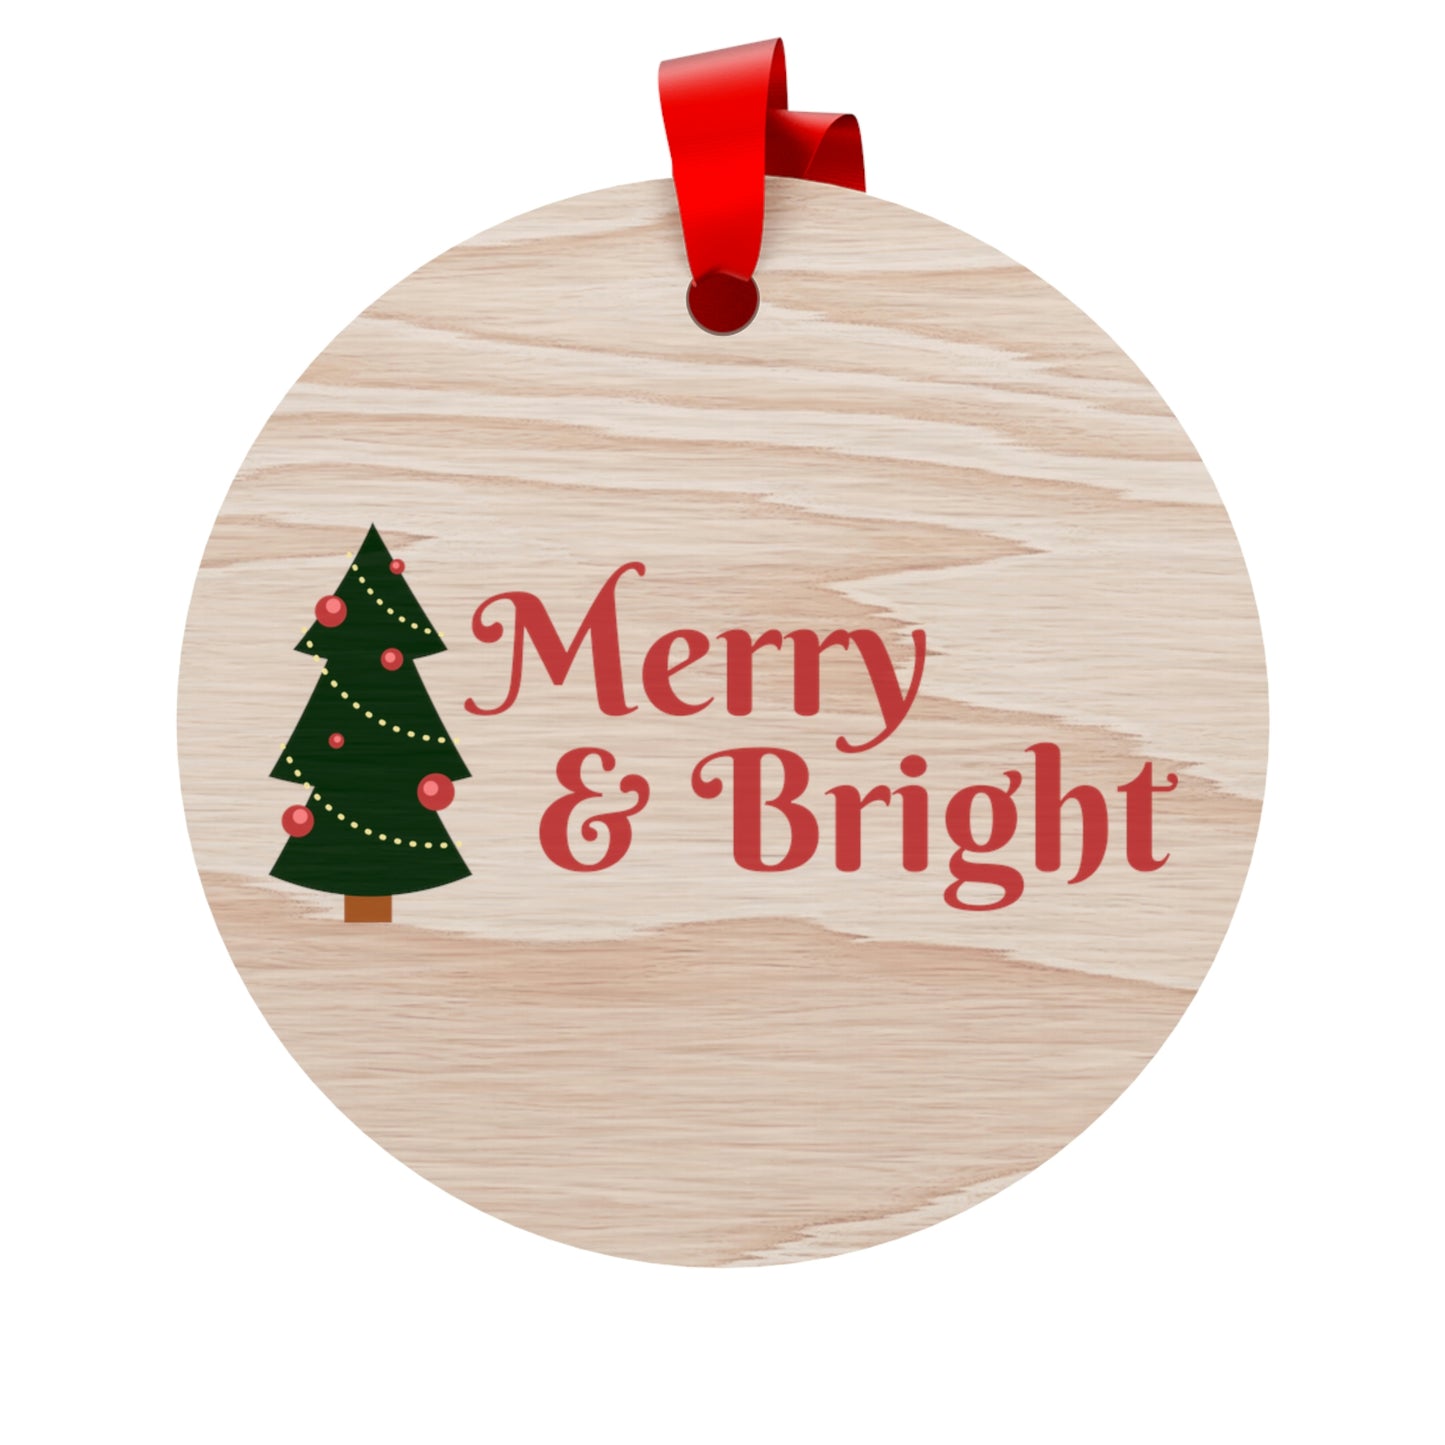 Merry & Bright Wooden Christmas Ornaments